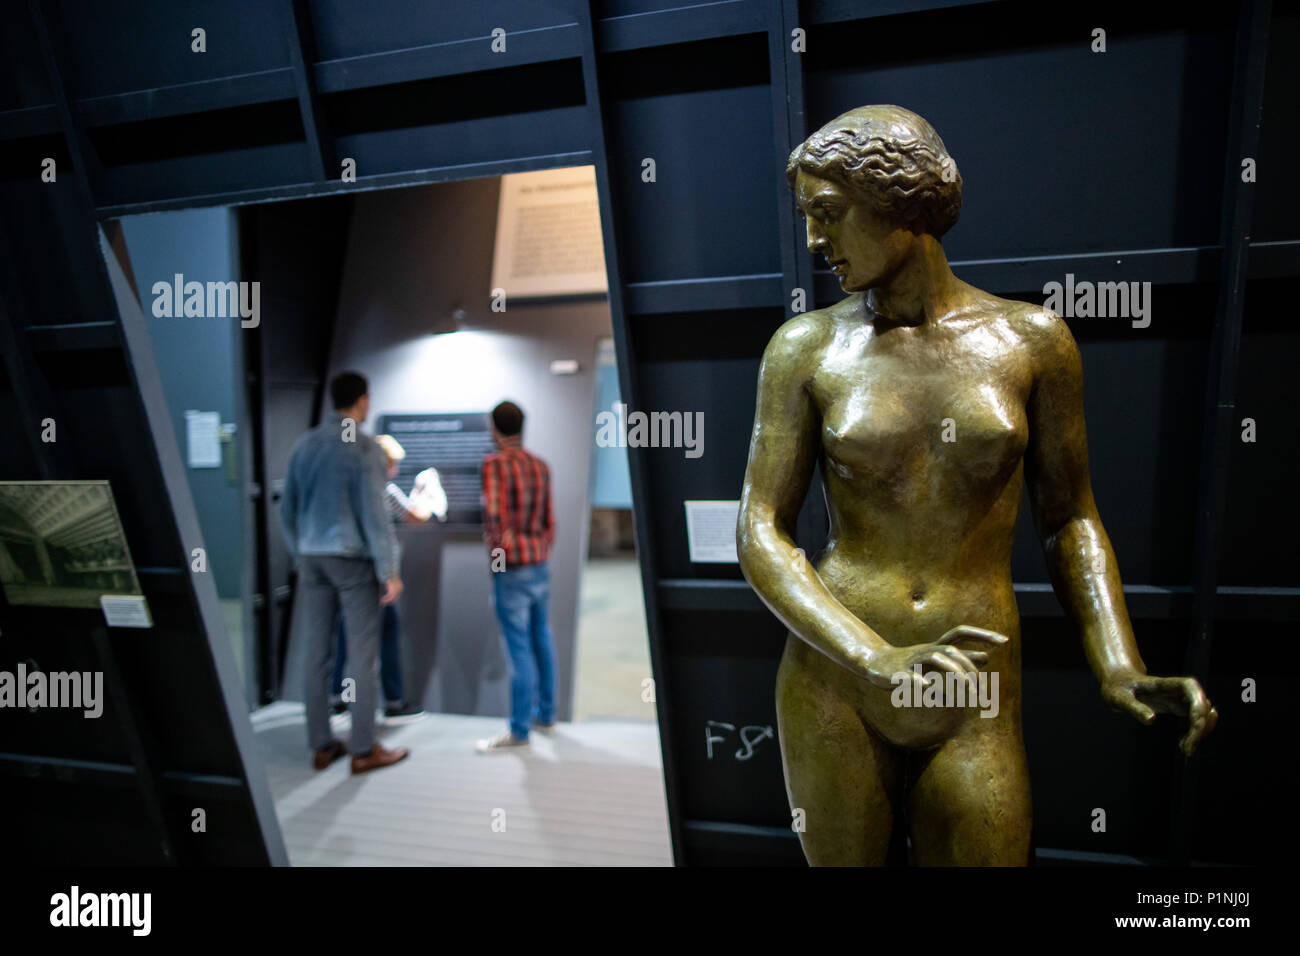 13 June 2018, Nuremberg, Germany: A life sized bronze figure from 1935 by sculptor Hanna Cauer can be seen at the exhibition 'Hitler.Macht.Oper · Propaganda und Musiktheater in Nürnberg' (lit. 'Propaganda and Musical Theatre in Nuremberg') at the Documentation Center Nazi Party Rally Grounds. The exhibition will be shown between the 15th of June 2018 and the 3rd of February 2019. It documents the role of musical theatre in National Socialist propaganda. Photo: Daniel Karmann/dpa Stock Photo